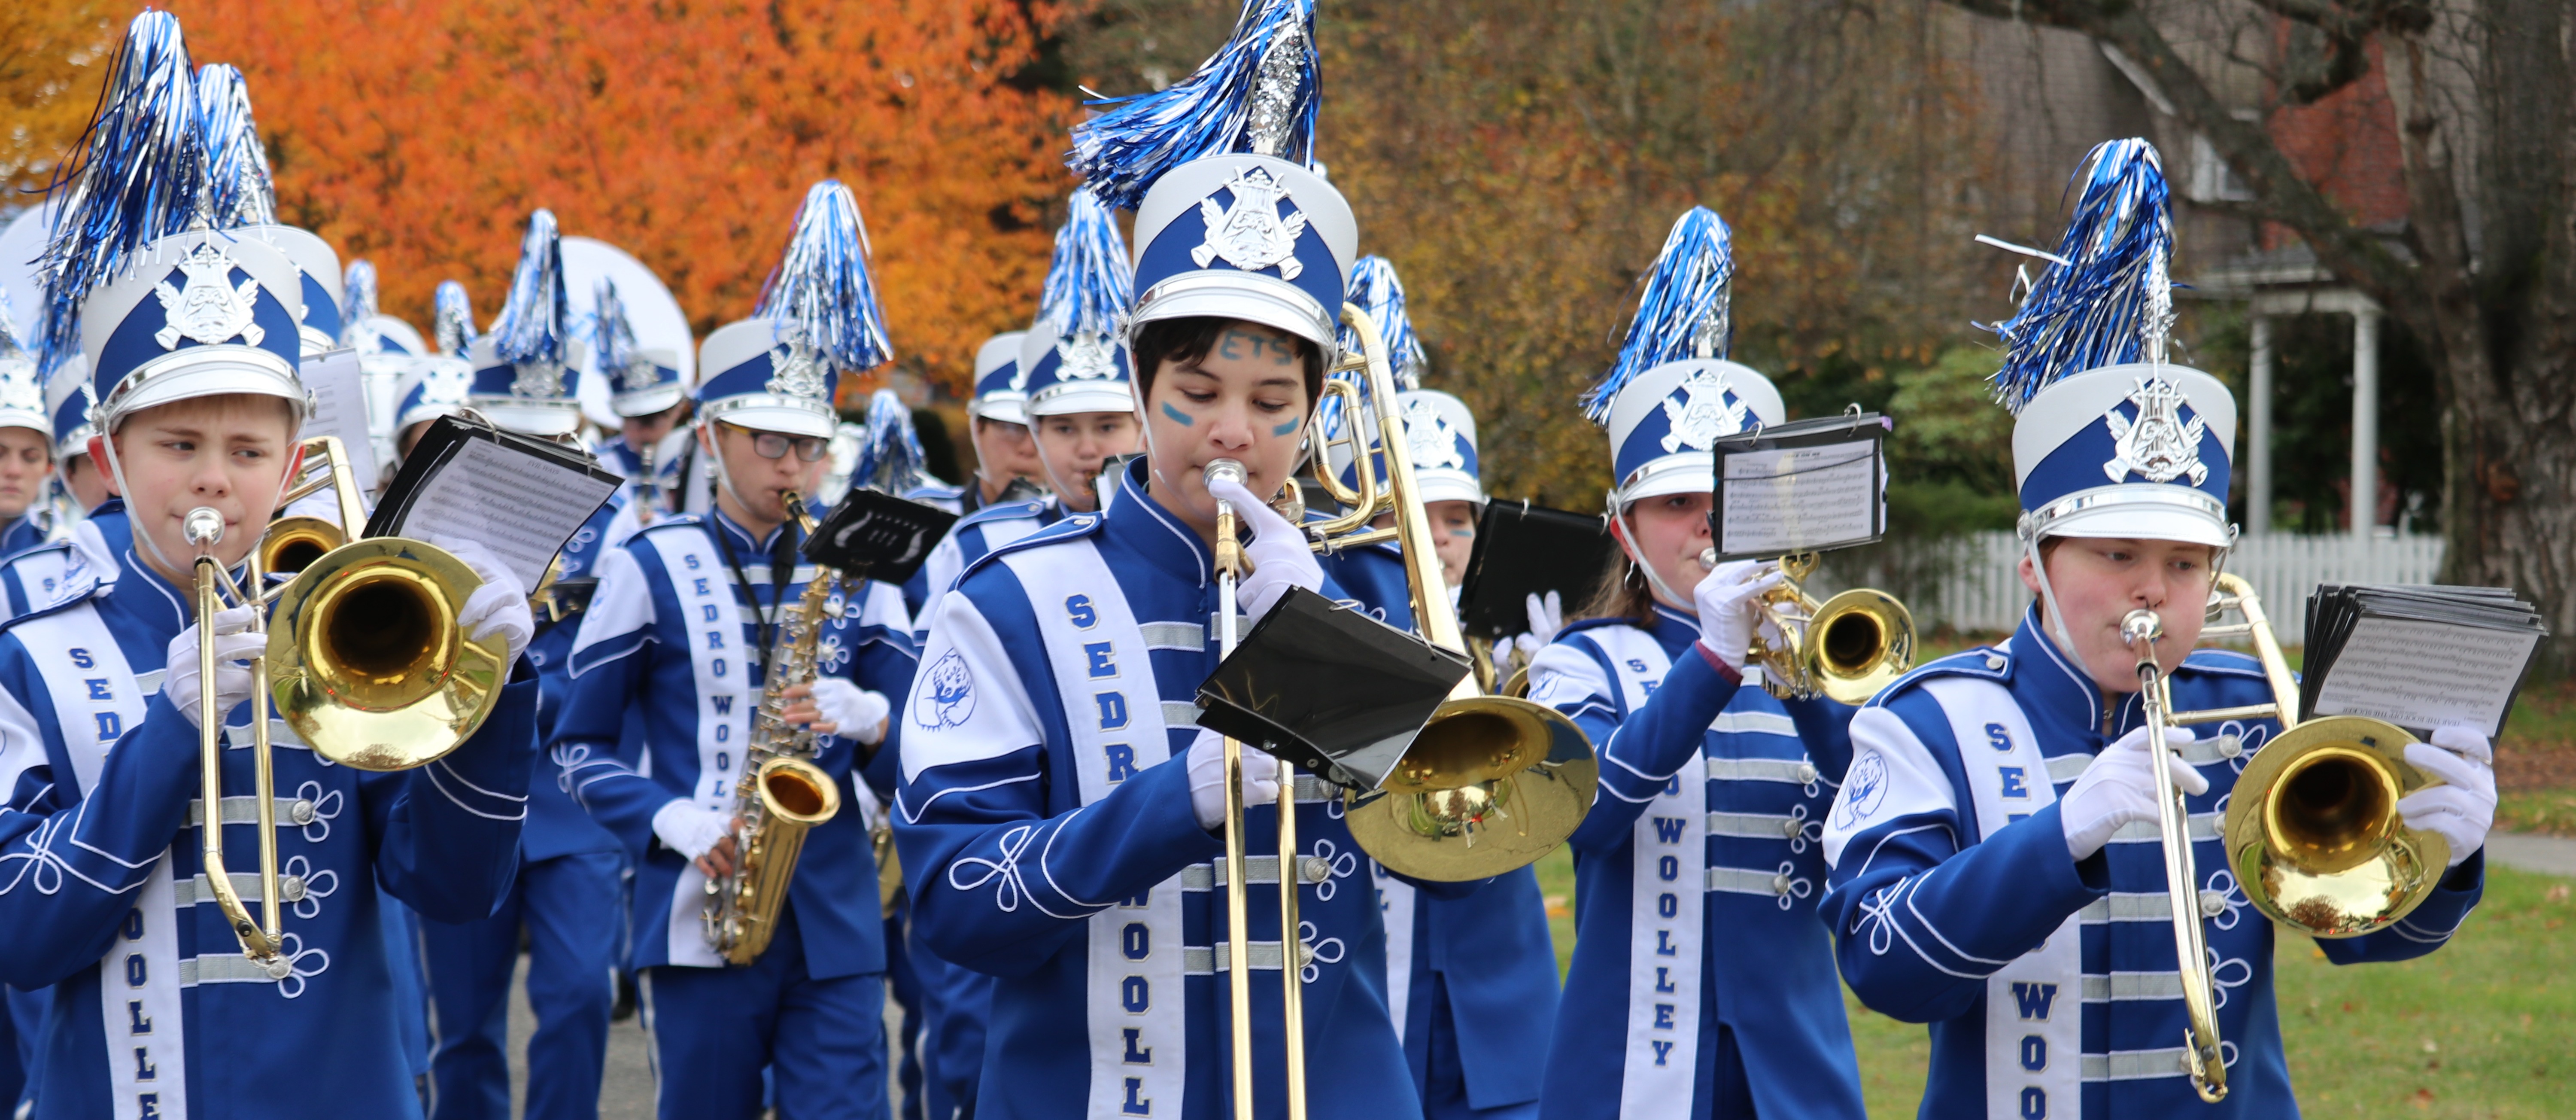 SWHS Marching Band performing in the annual Veterans Day Parade.